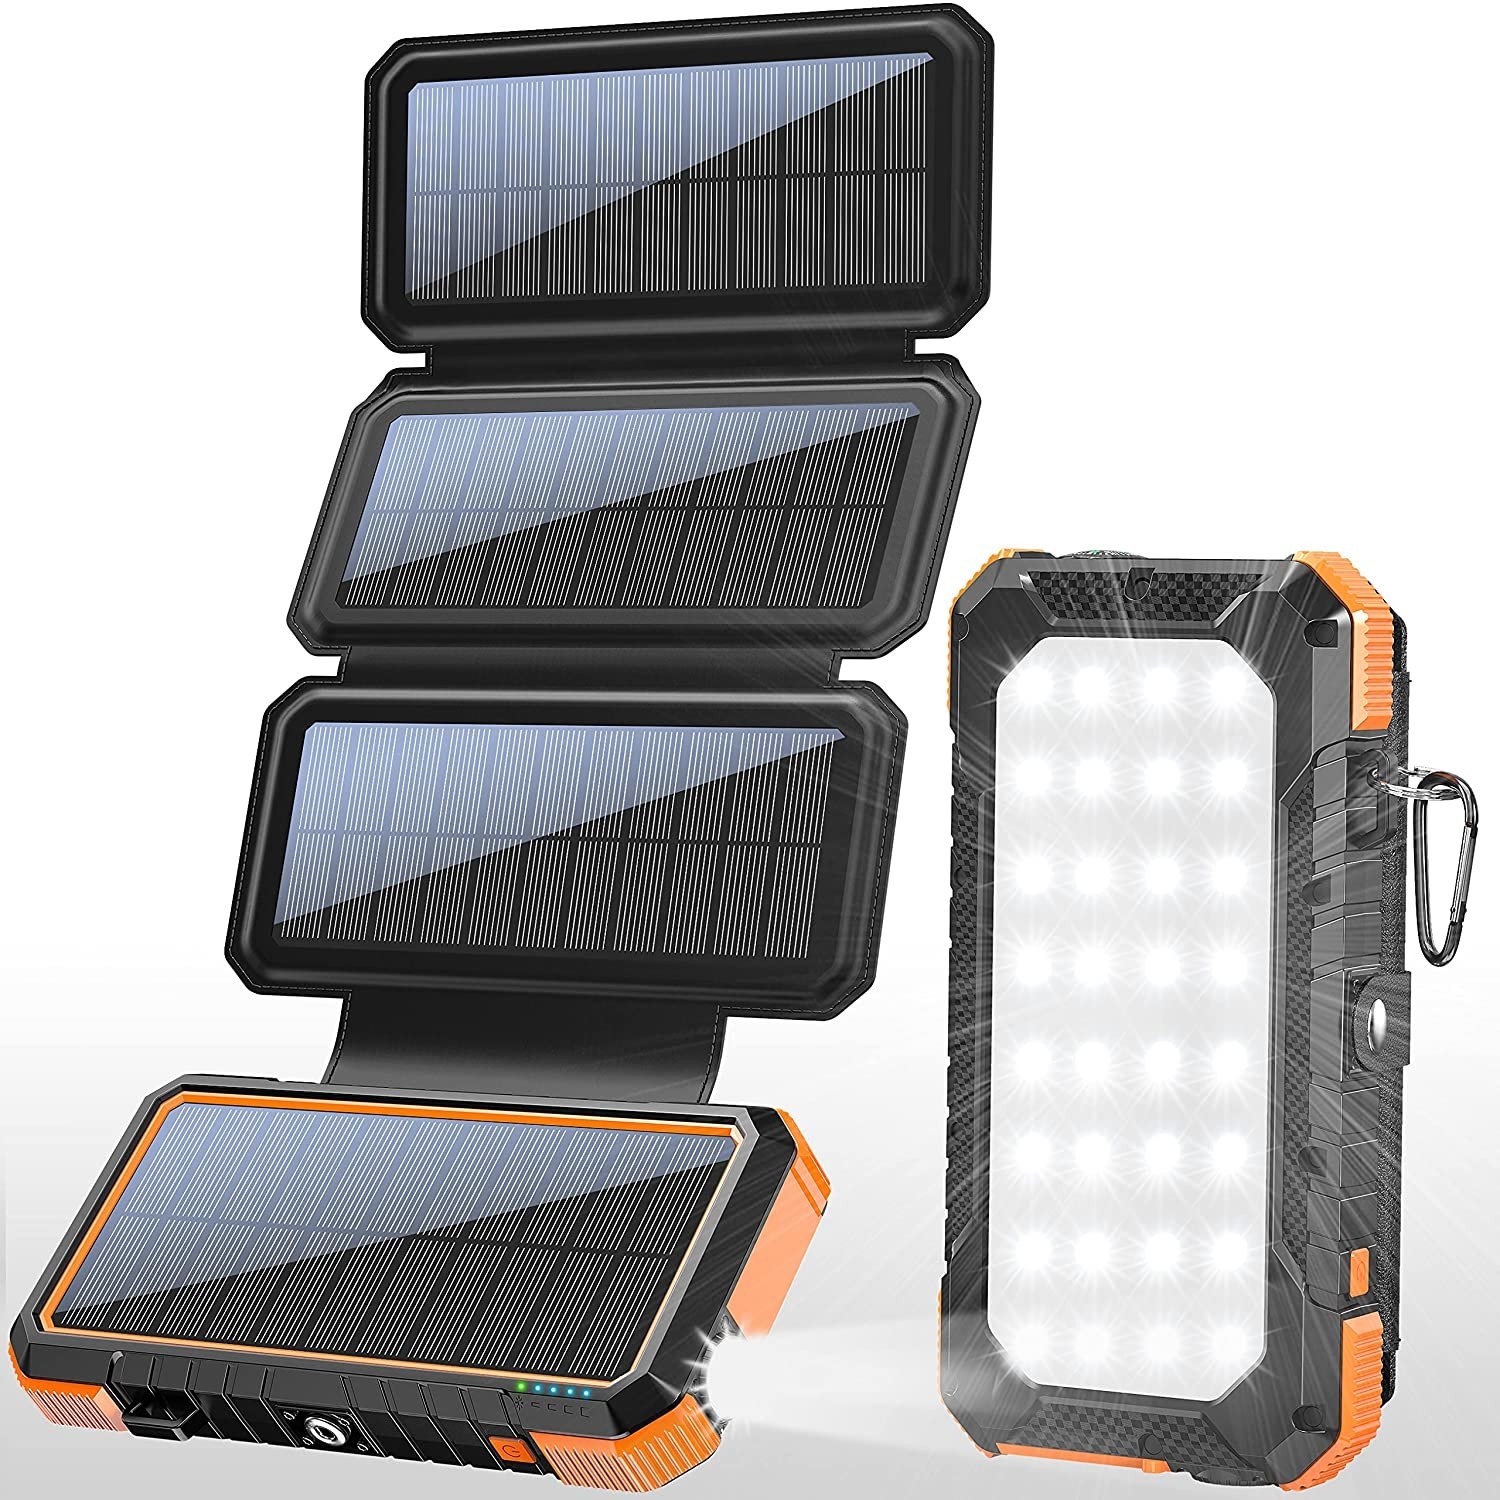 Orange and black solar powered portable charger next to unfolded version